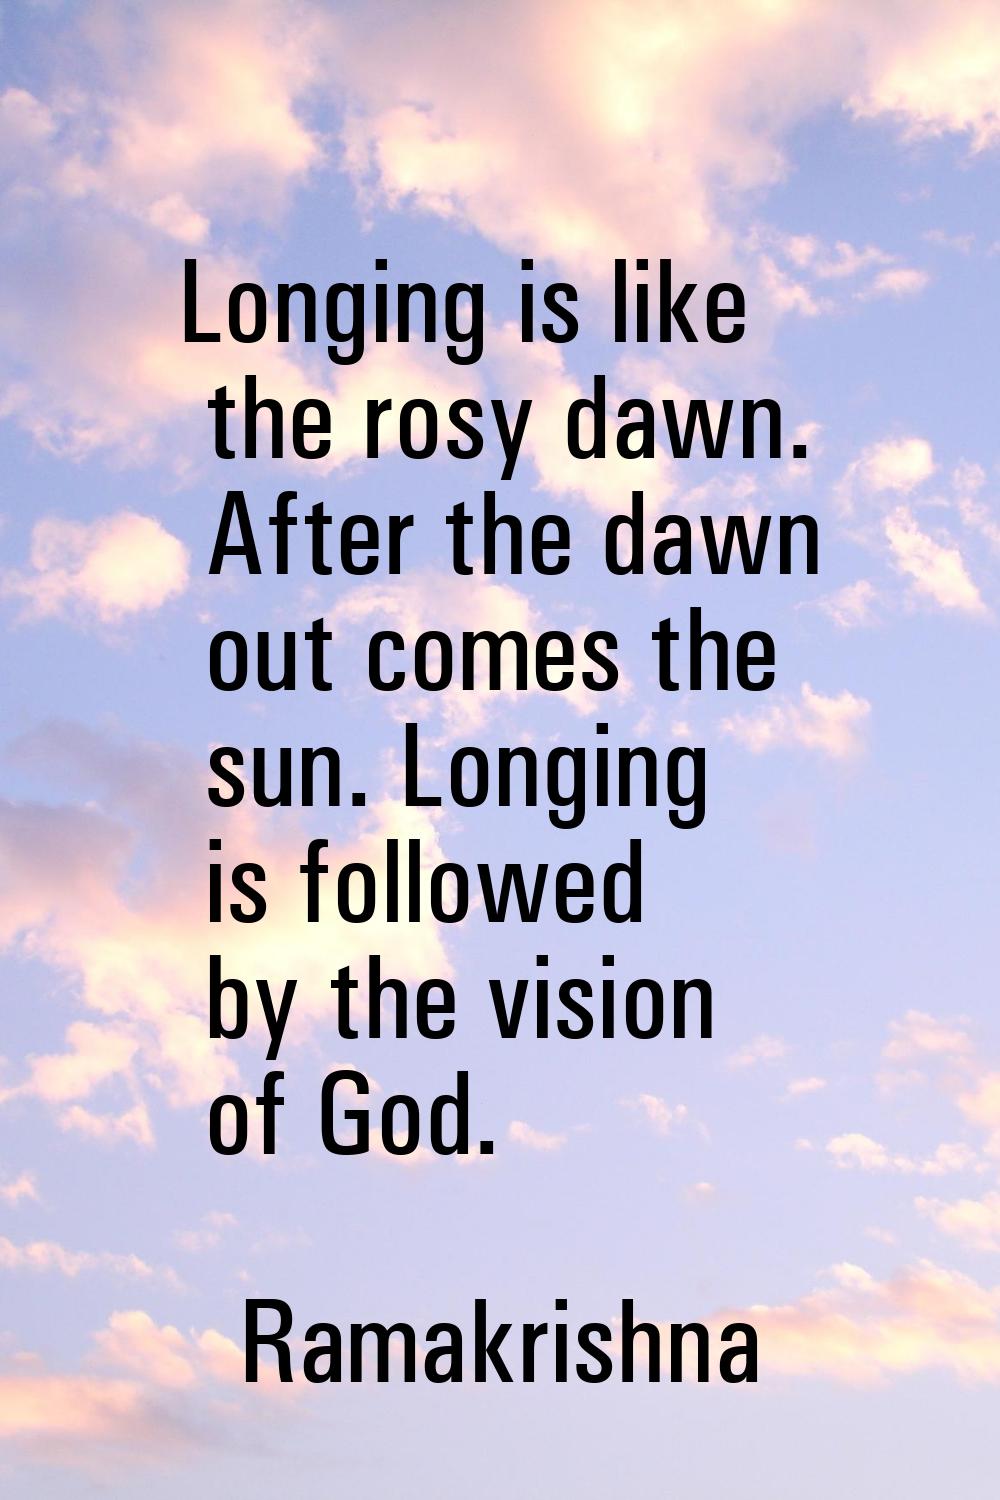 Longing is like the rosy dawn. After the dawn out comes the sun. Longing is followed by the vision 